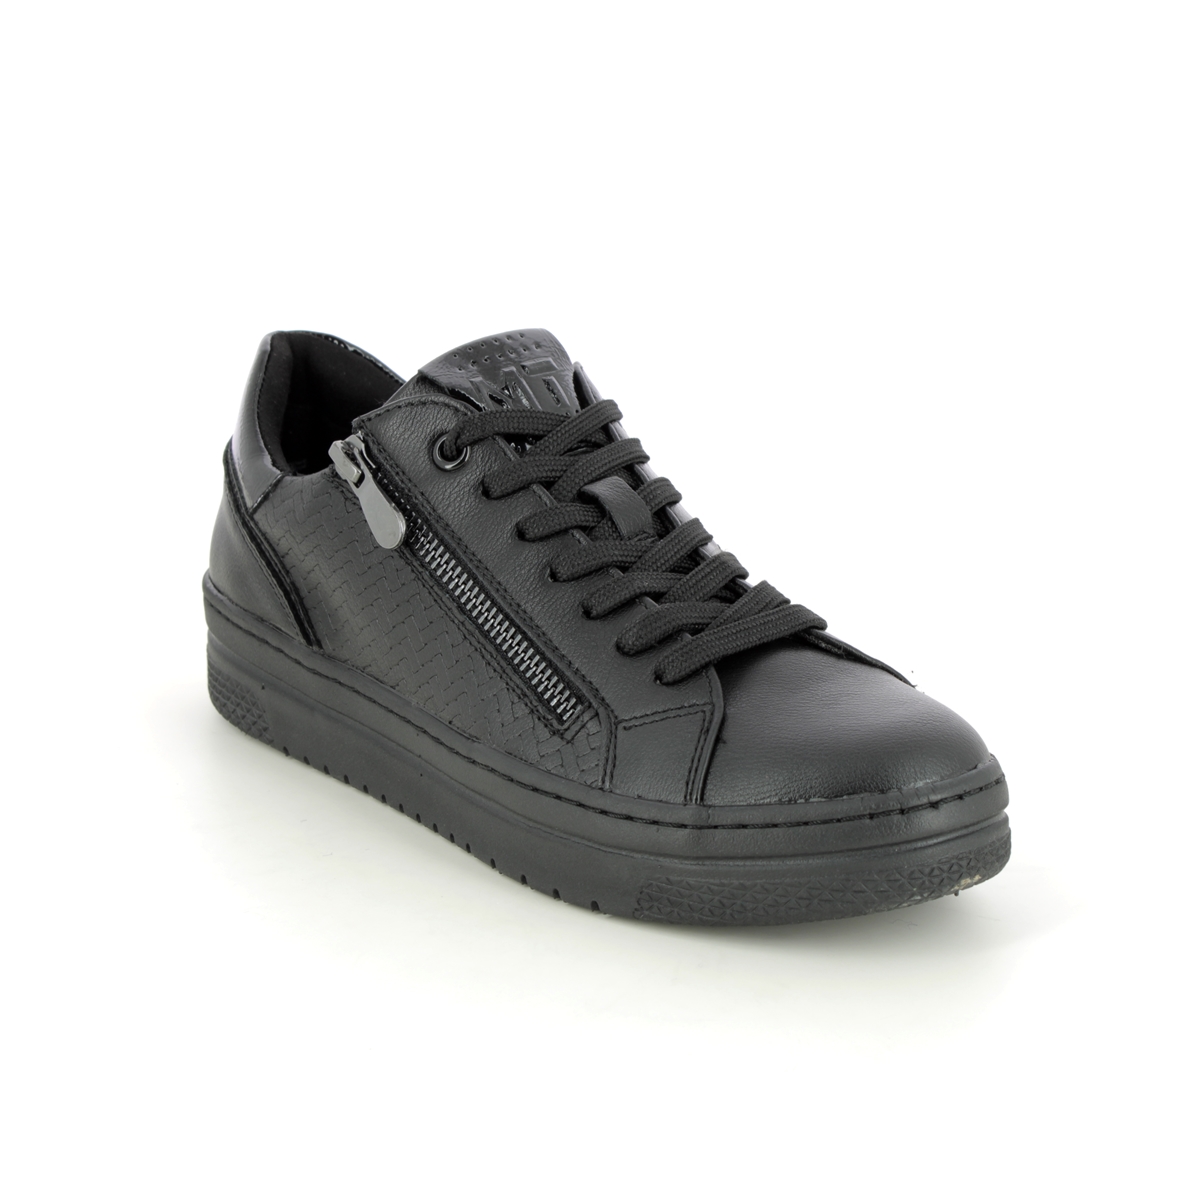 Marco Tozzi Raveen Black Womens Trainers 23709-29-098 In Size 41 In Plain Black